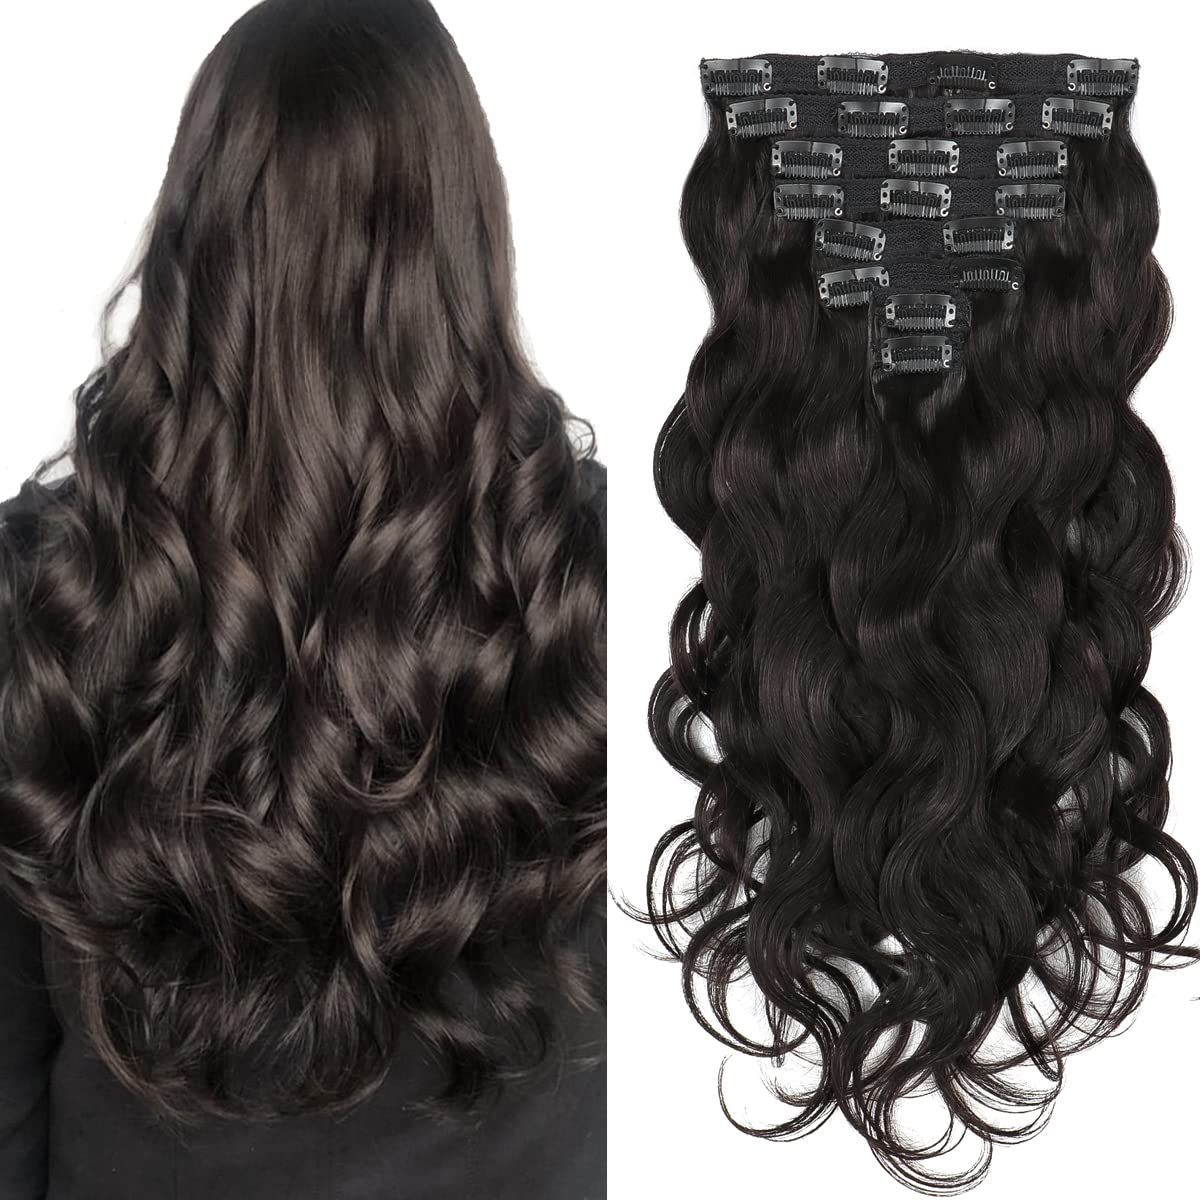 Long Black Wavy Wig-1B Black Wavy Hairstyles -Wigs & Hairpieces